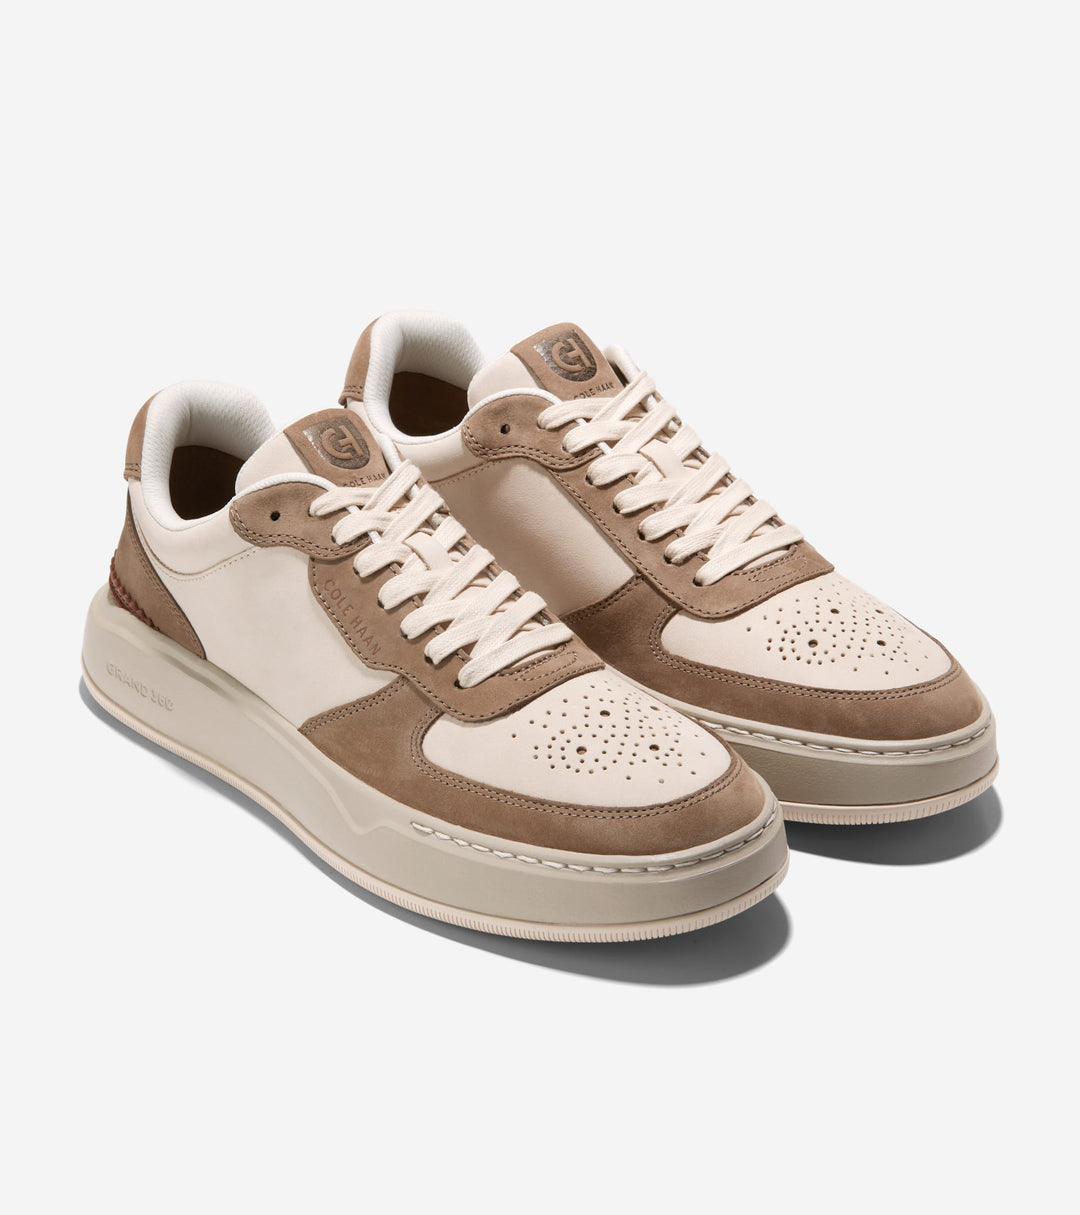 GRAND PRO CROSSOVER SNEAKER - COLE HAAN